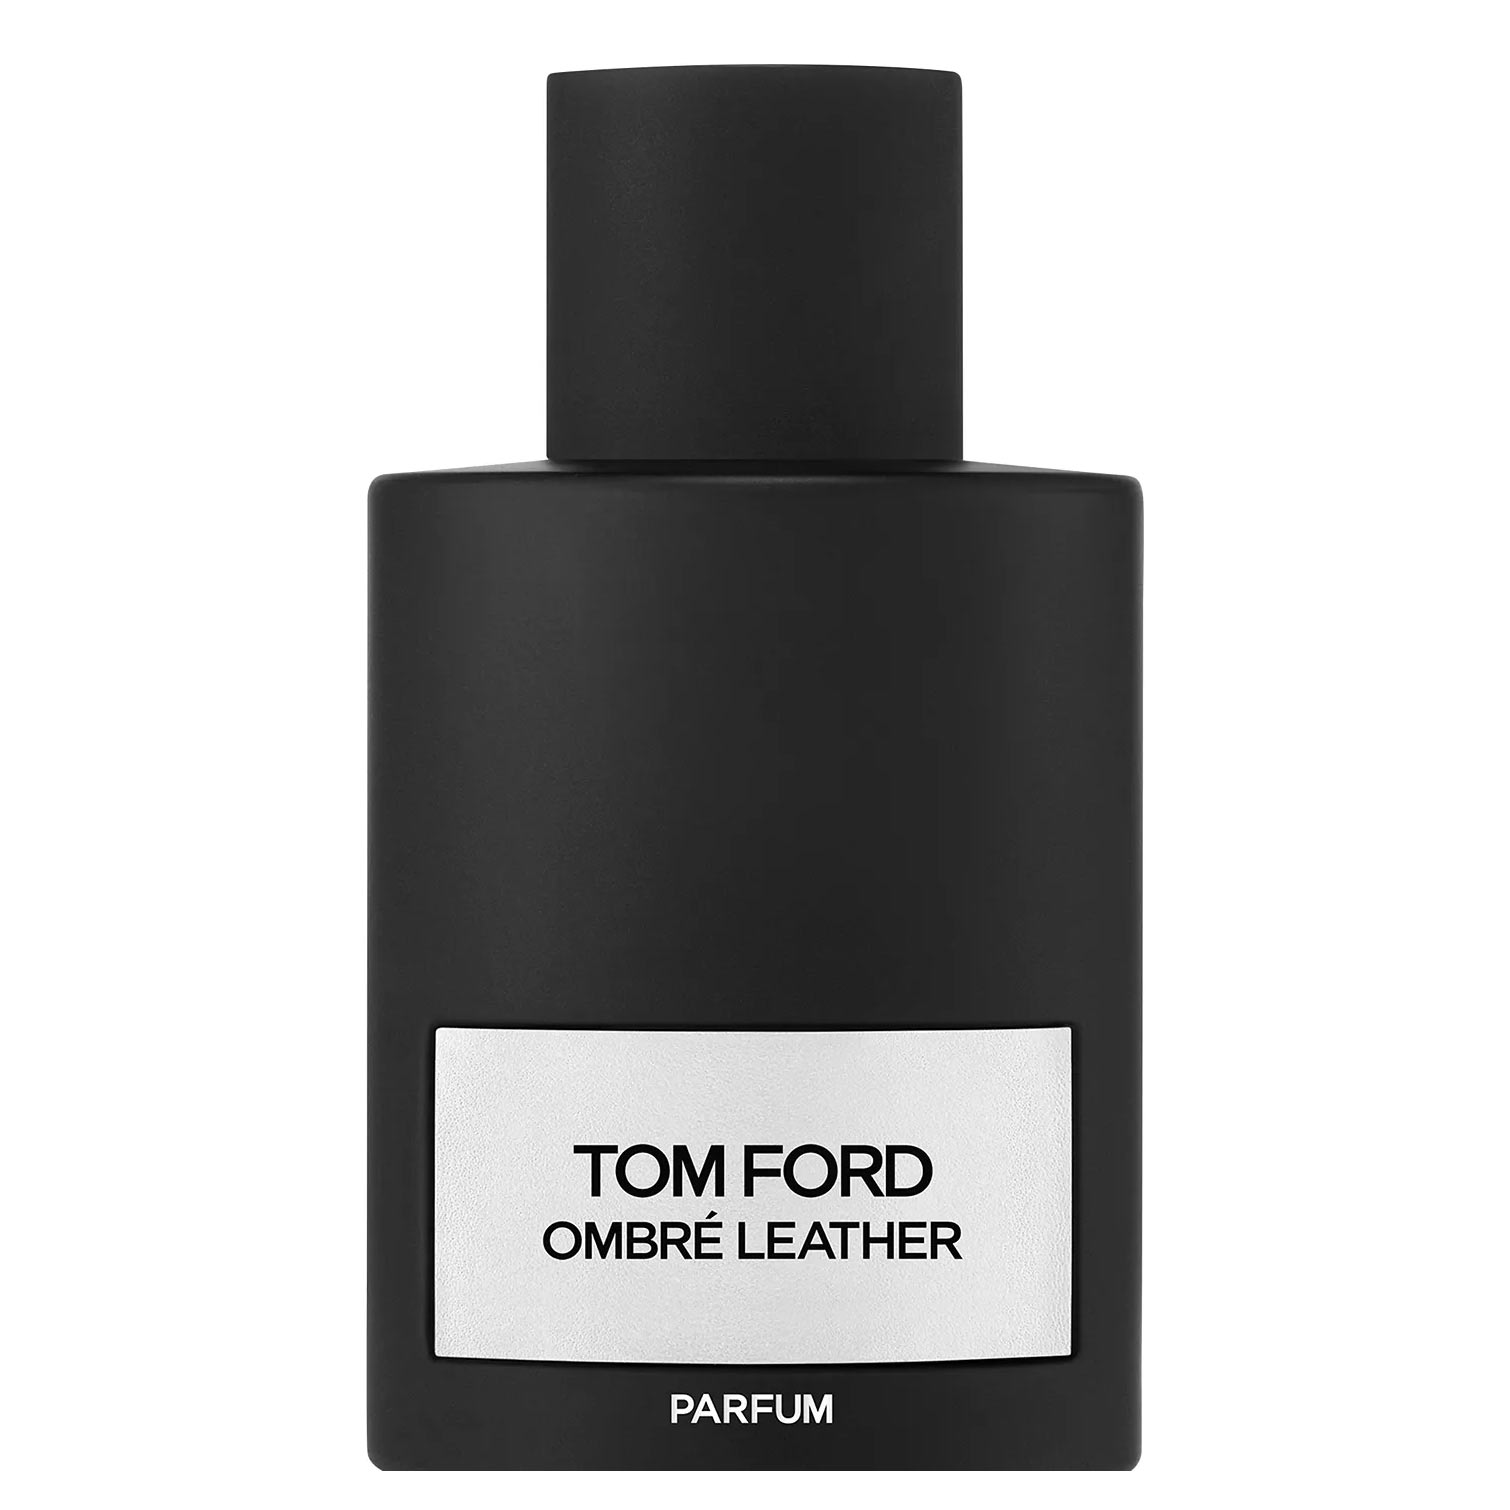 Ombre-Leather-Parfum-Tom-Ford